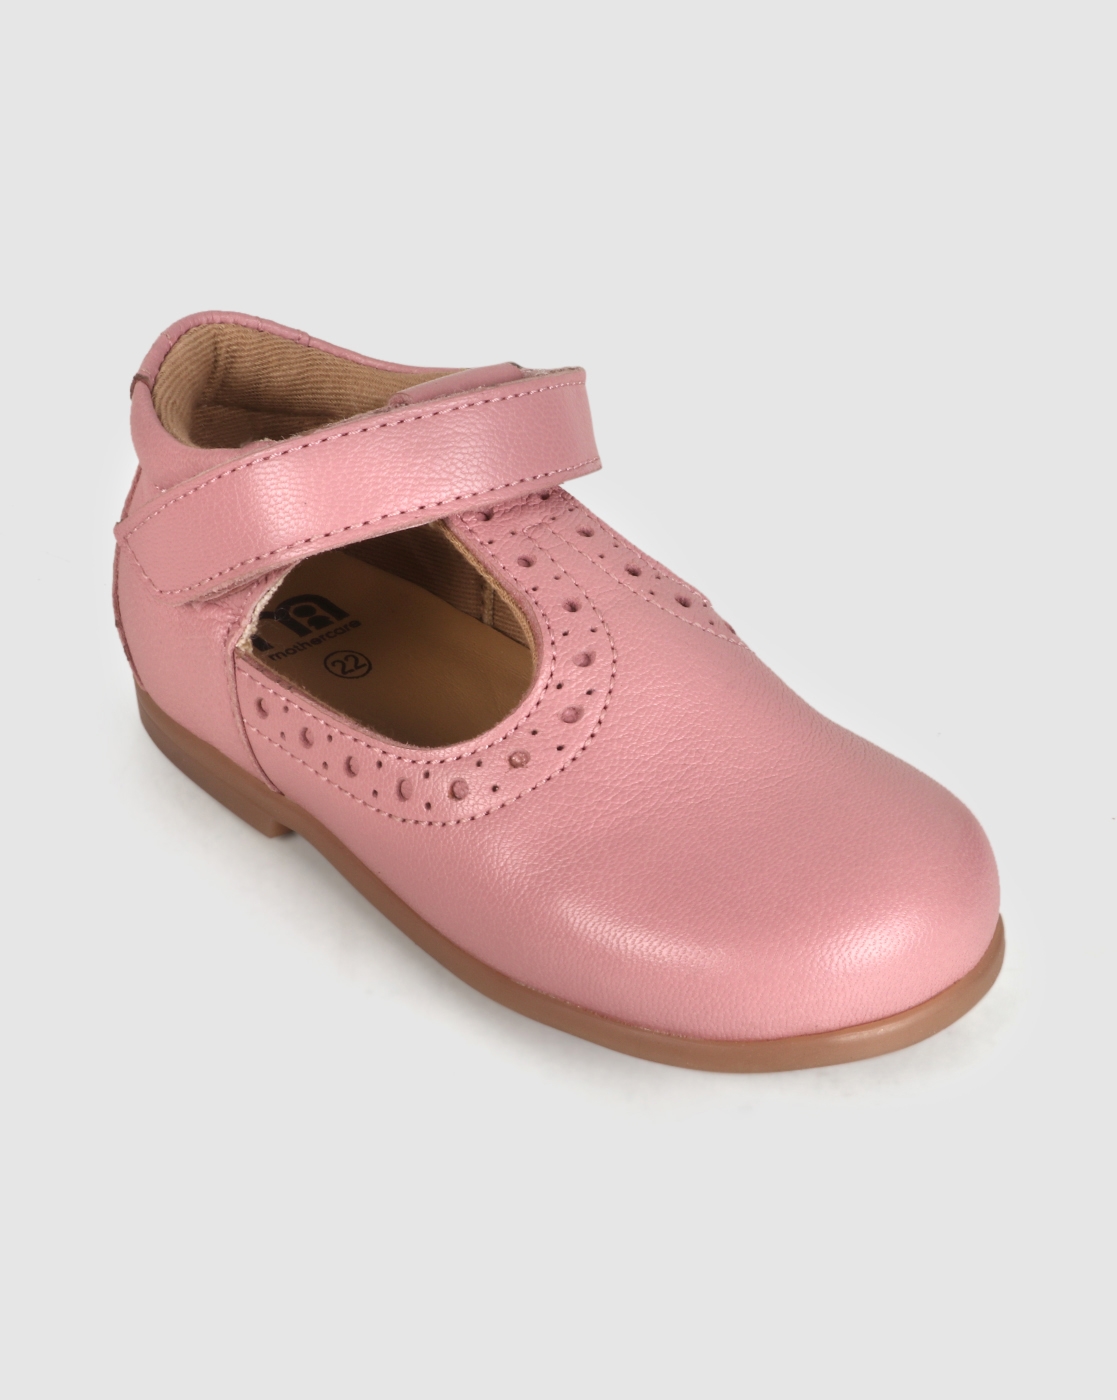 Mothercare | Girls First Walker Shoes Cut Out Design - Pink